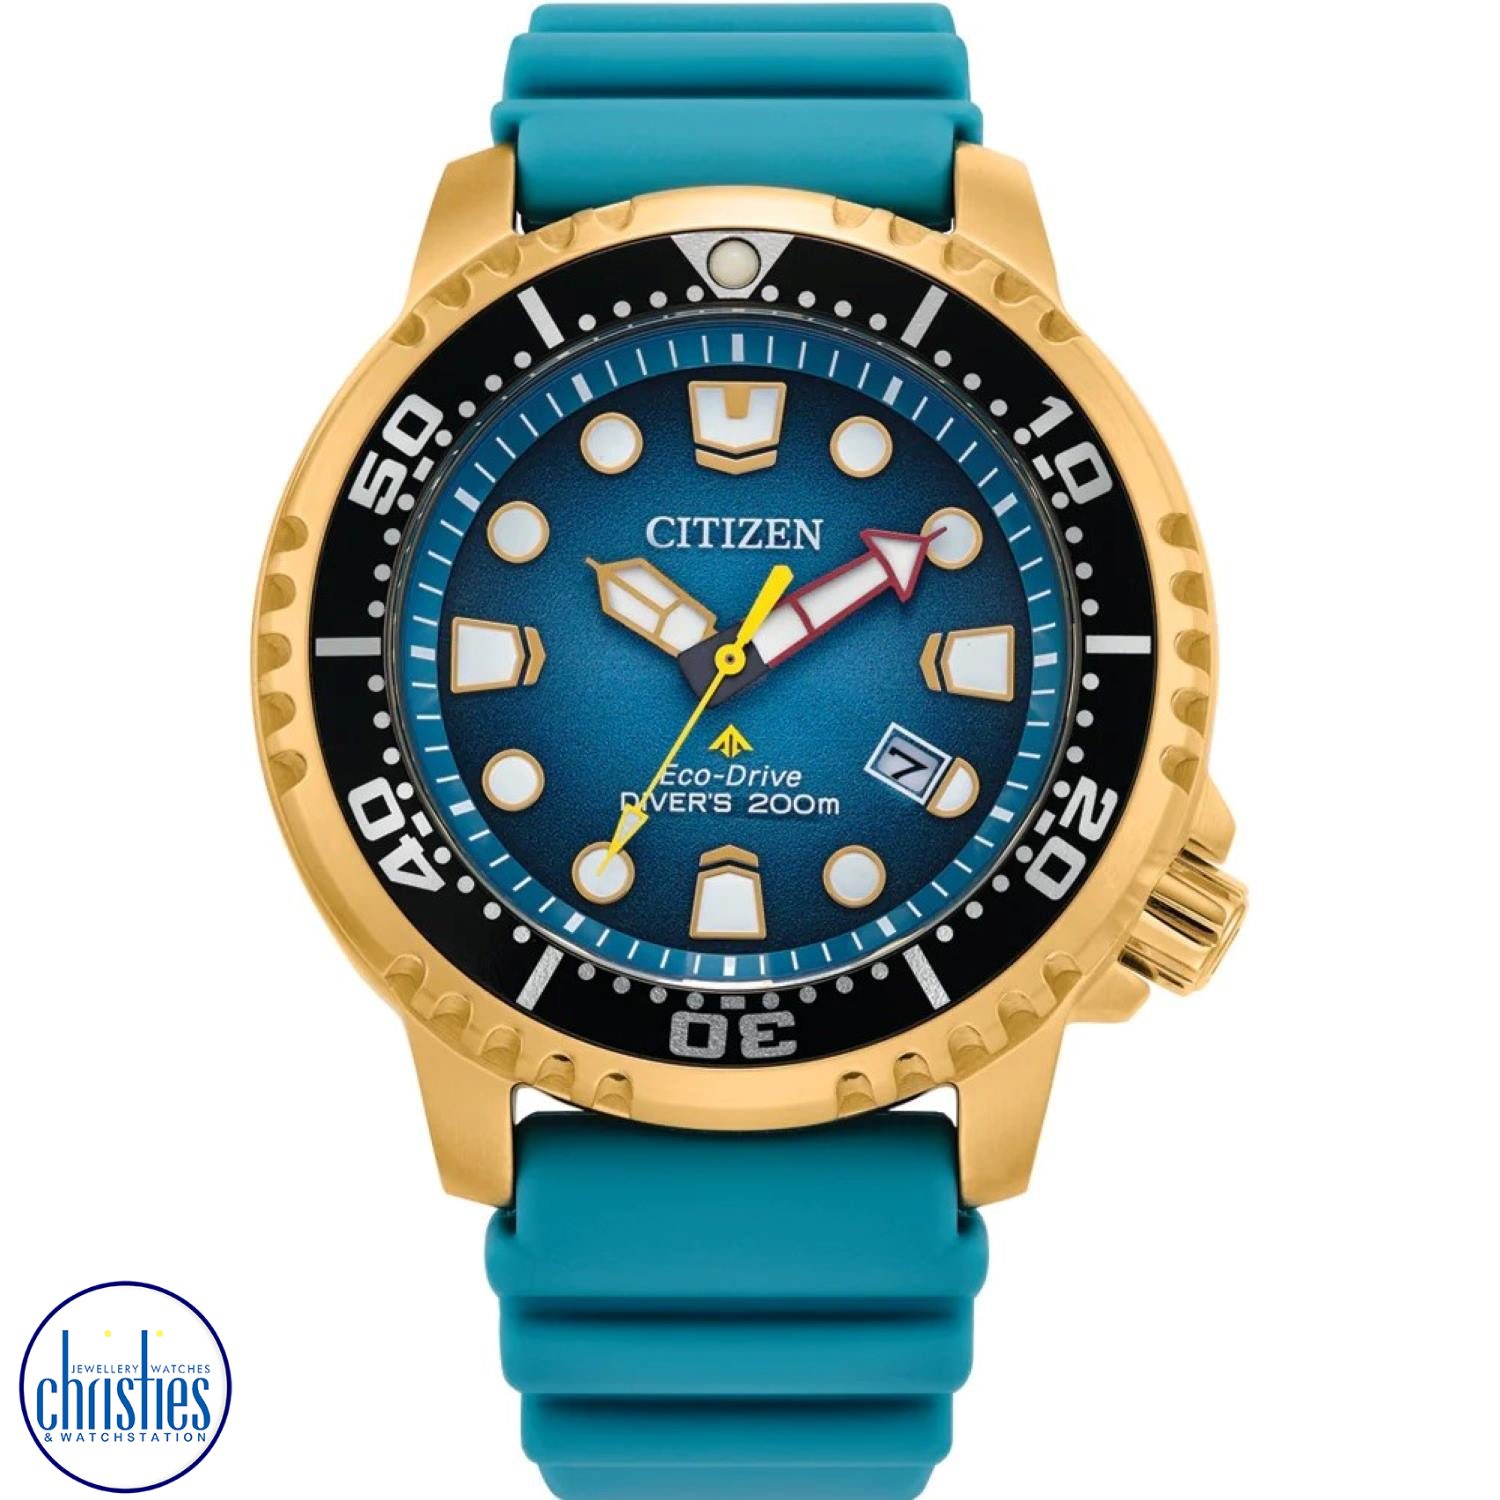 BN0162-02 Citizen Promaster Eco-Drive Watch WR200 Turquoise Dial and Strap BN0162-02X diamond jewellery